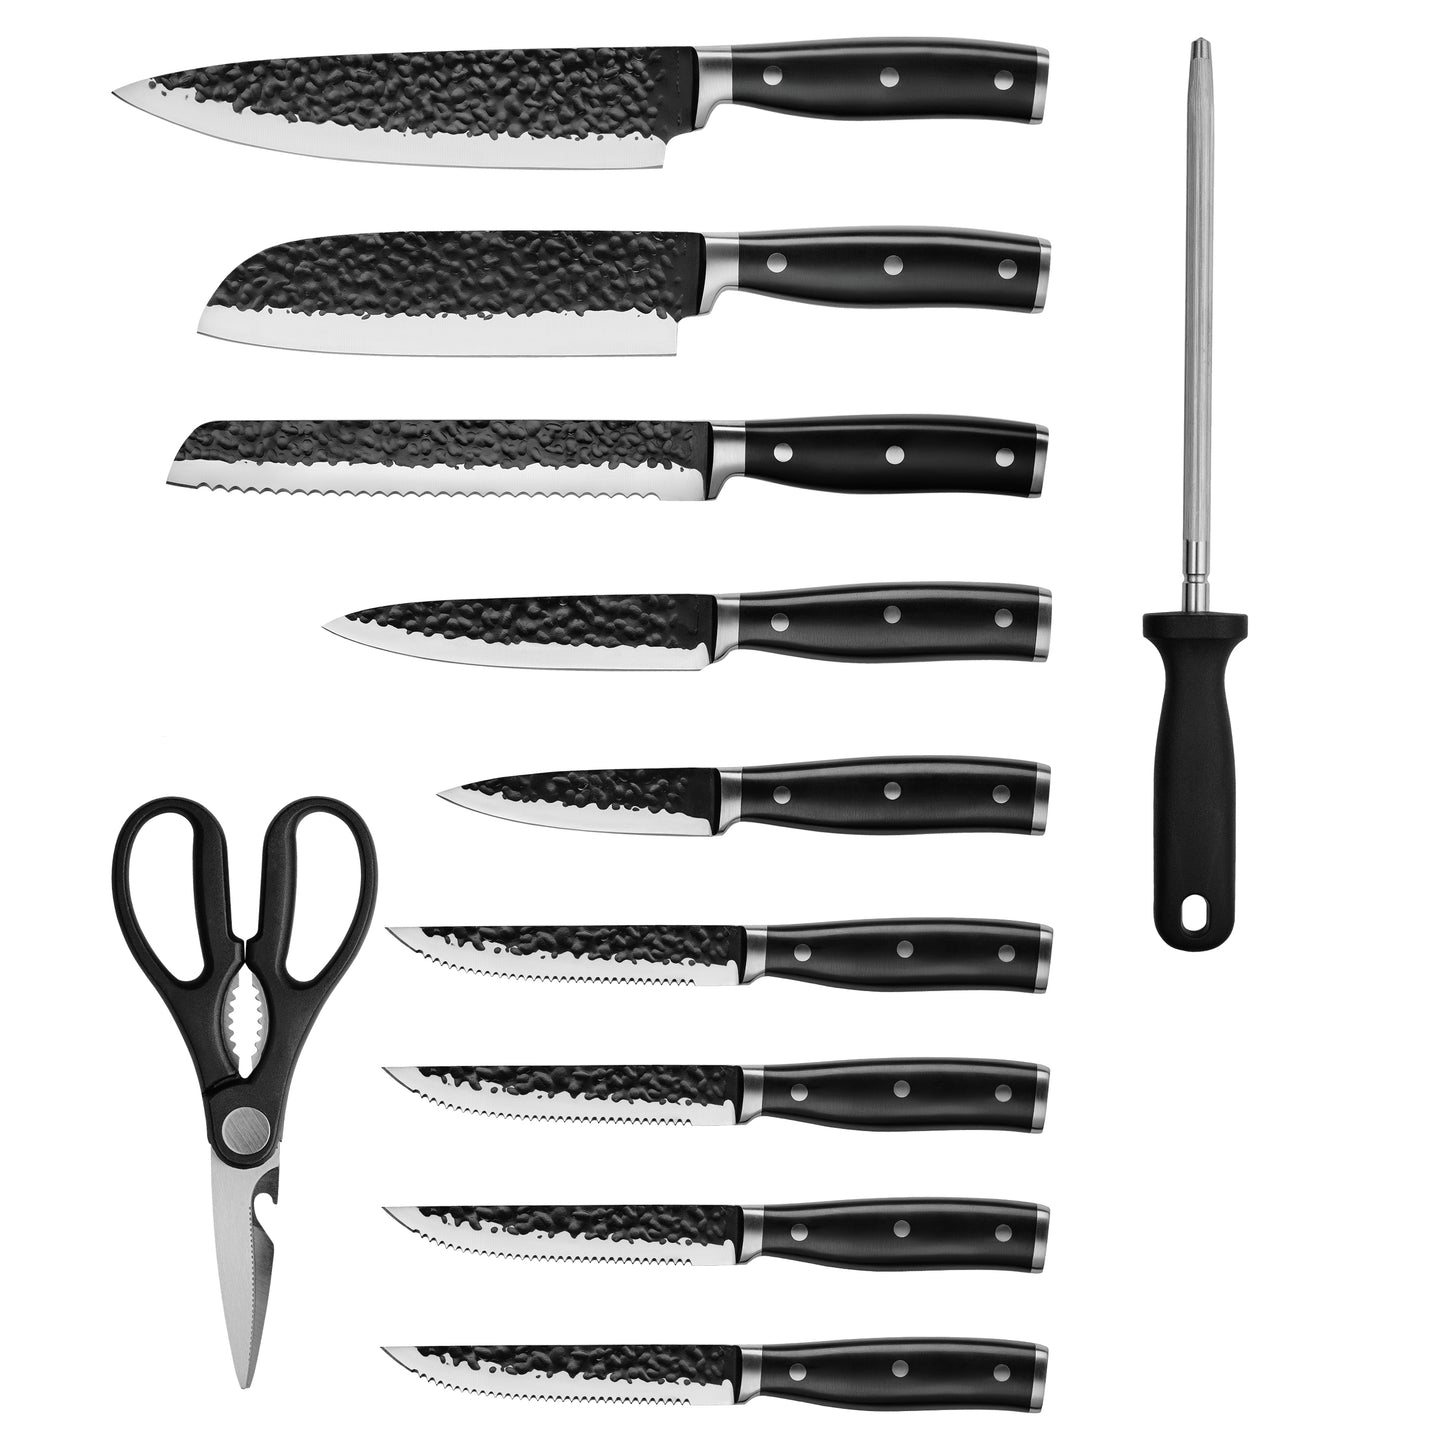 OrGREENiC Hammered High Carbon Steel Knife Set - Non-Stick Tsuchimi Blade Texture, Ergonomic Handle, Professional Sharpness for Precision Cutting - Includes Chef, Bread, Utility, and Steak Knives